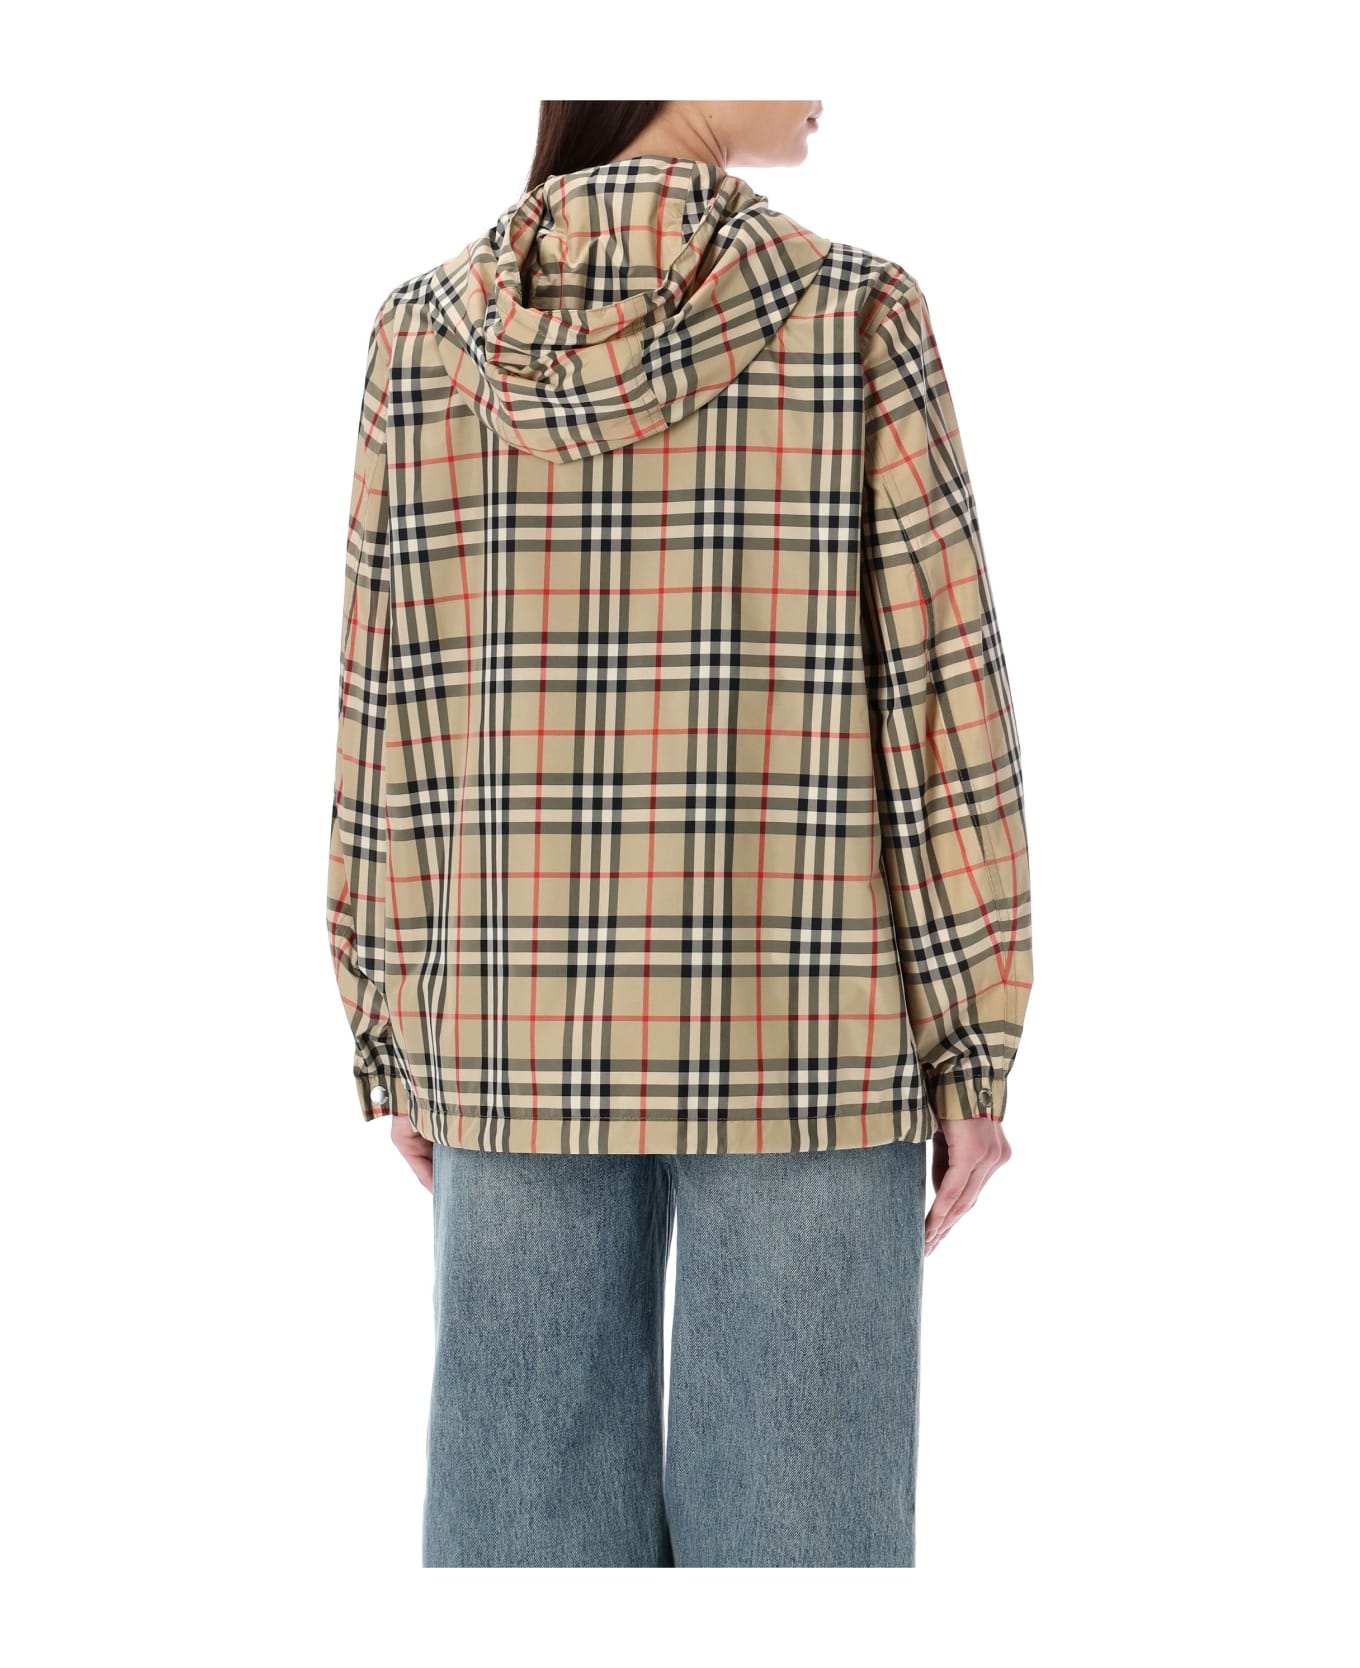 Burberry London Everton Vintage Check Jacket - ARCHIVE BEIGE IP CHK ブレザー